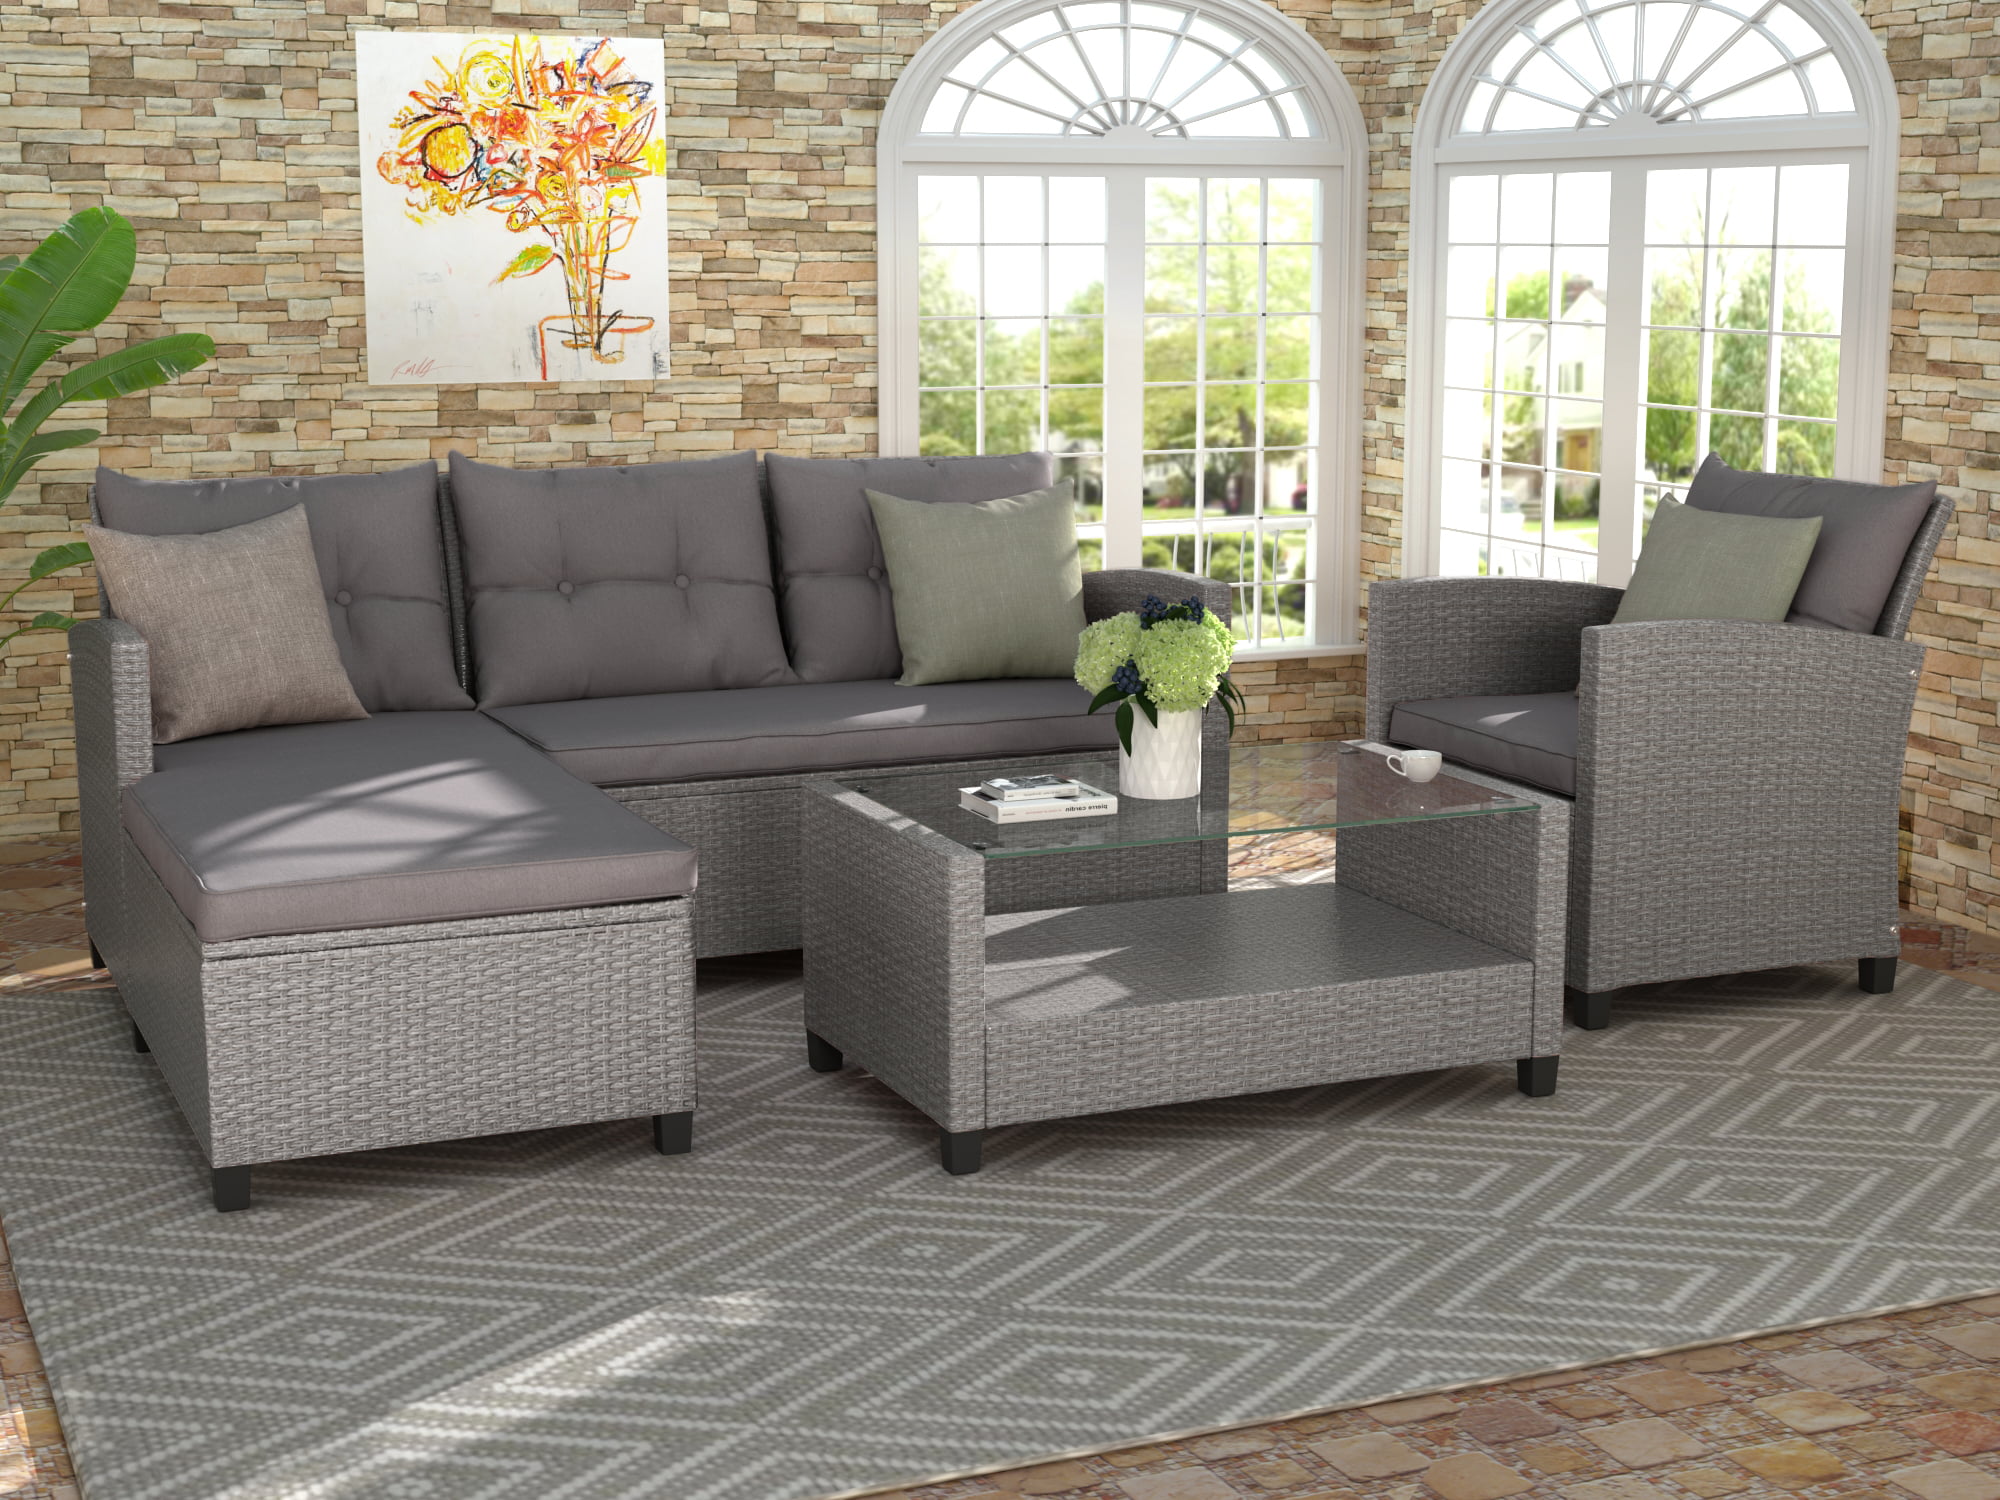 Sectional Patio Furniture Sale - hgreendesign